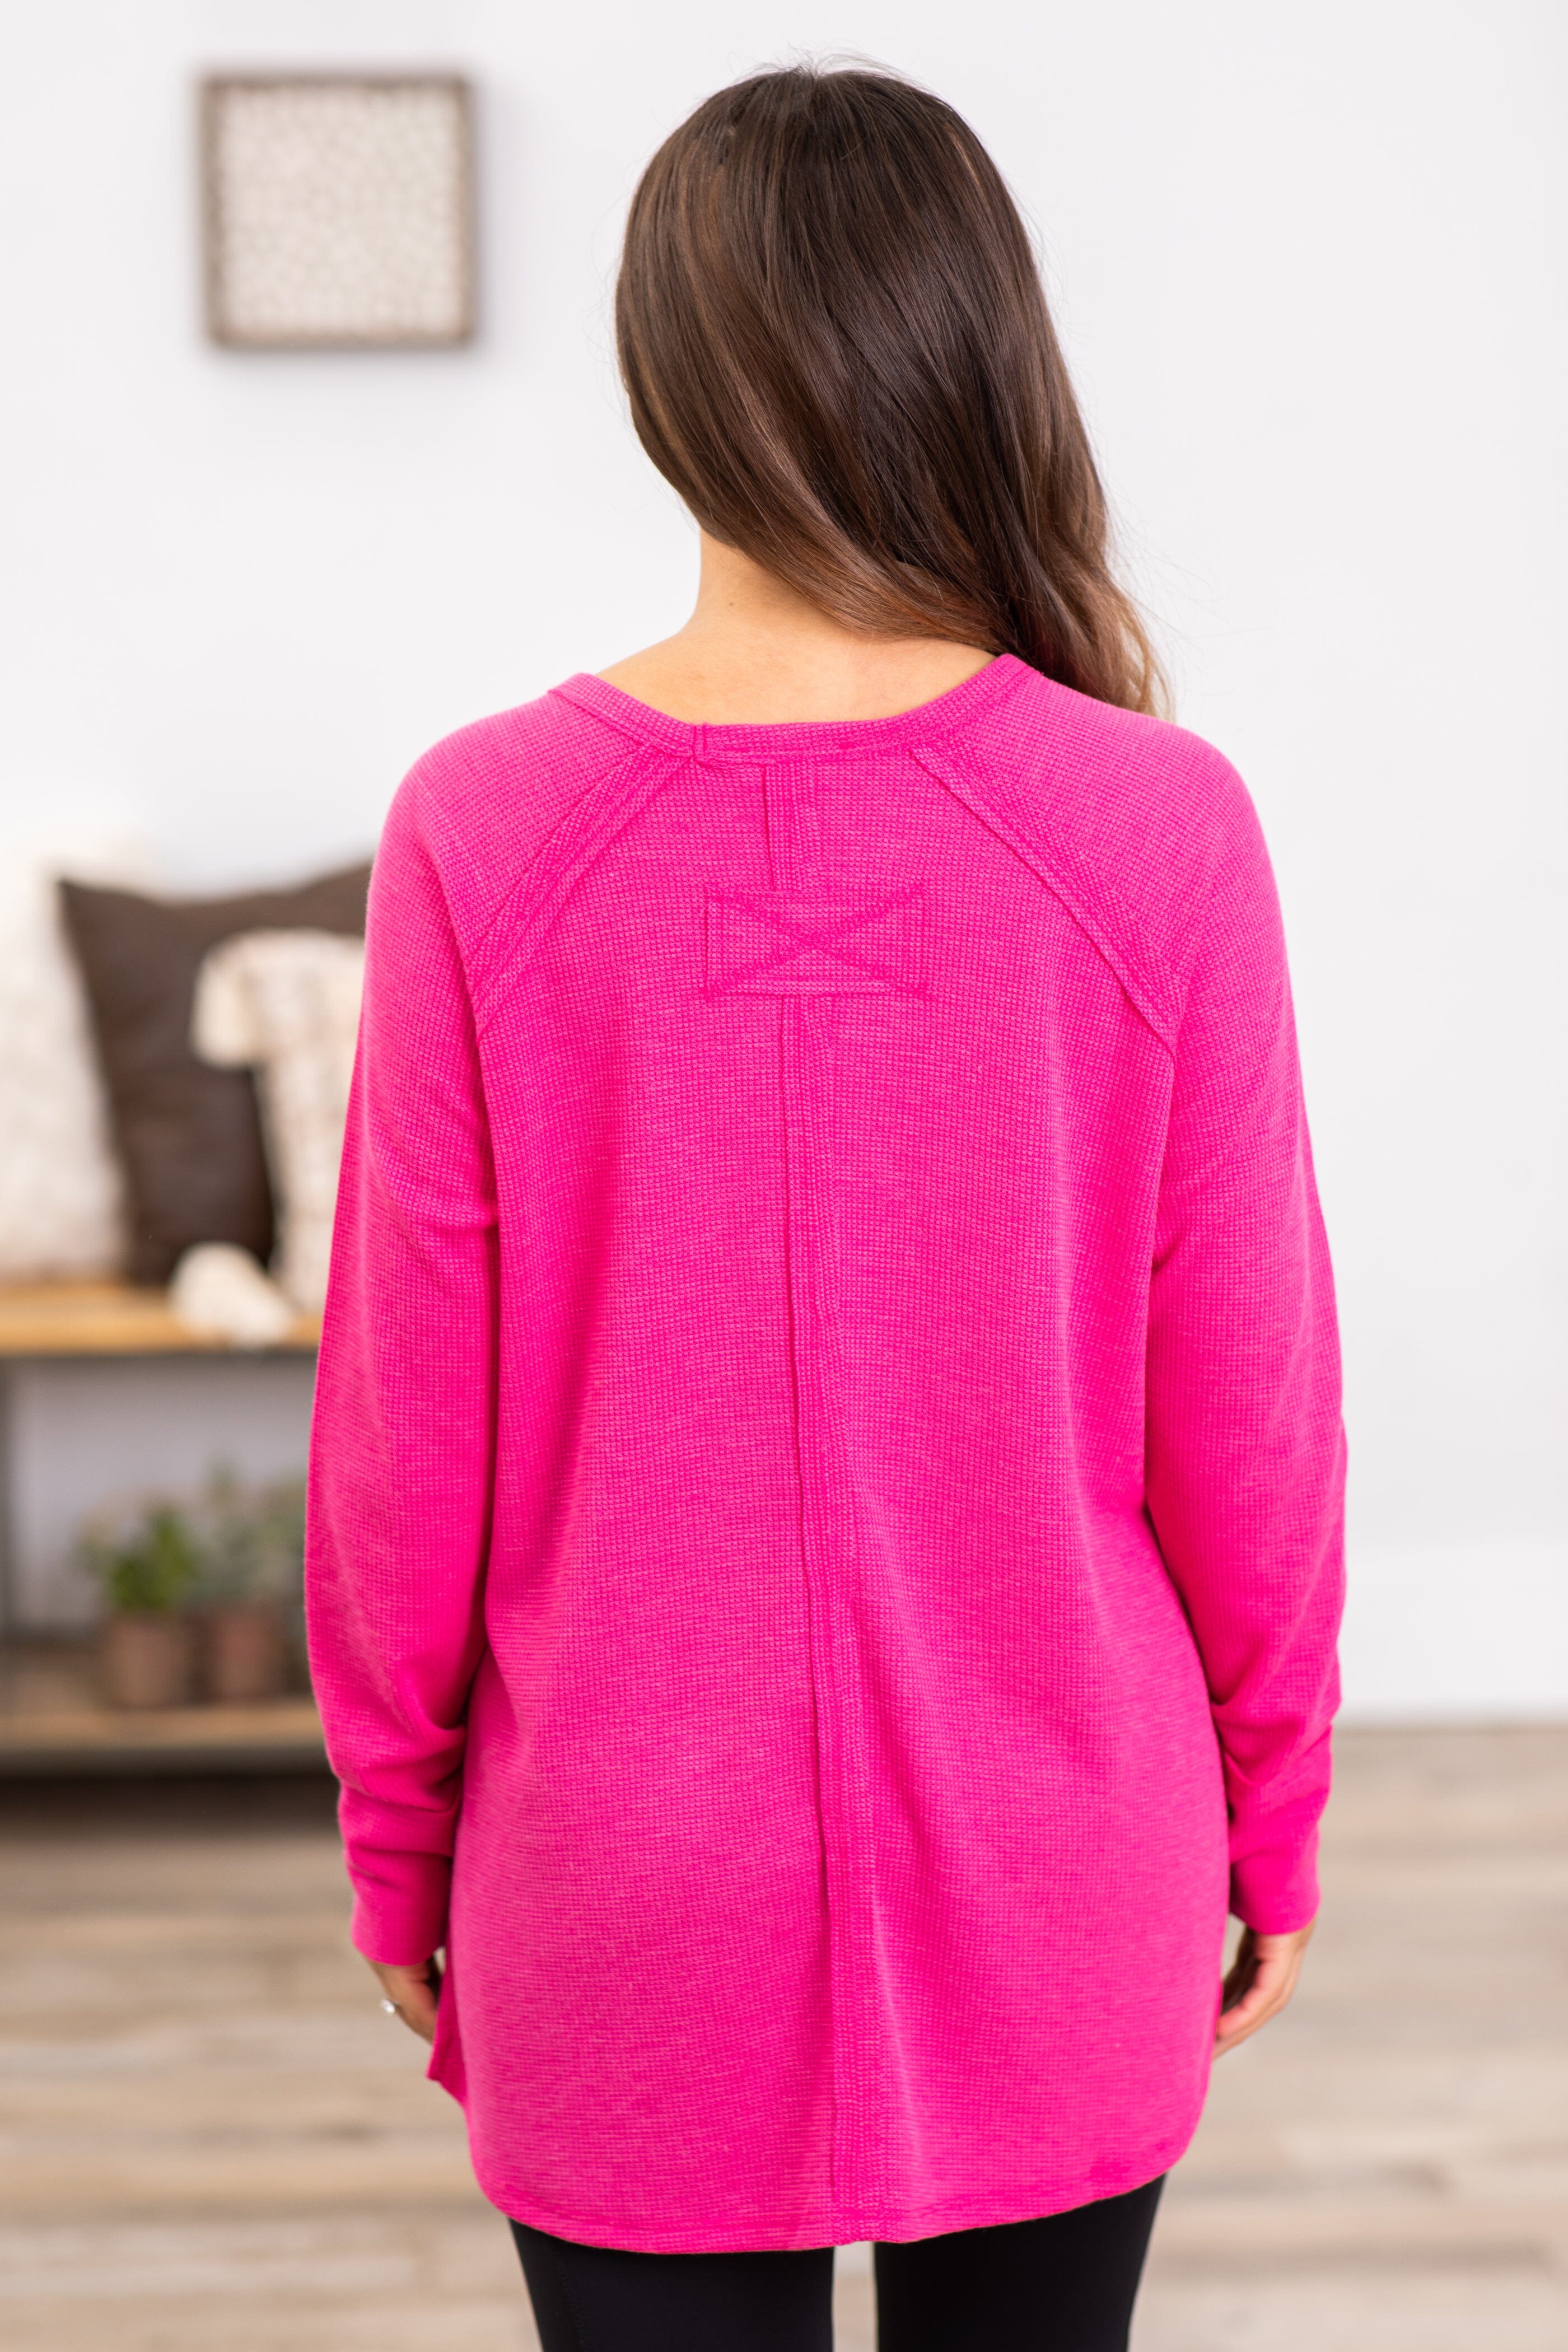 Hot Pink Baby Waffle Knit Top With Side Slit - Filly Flair